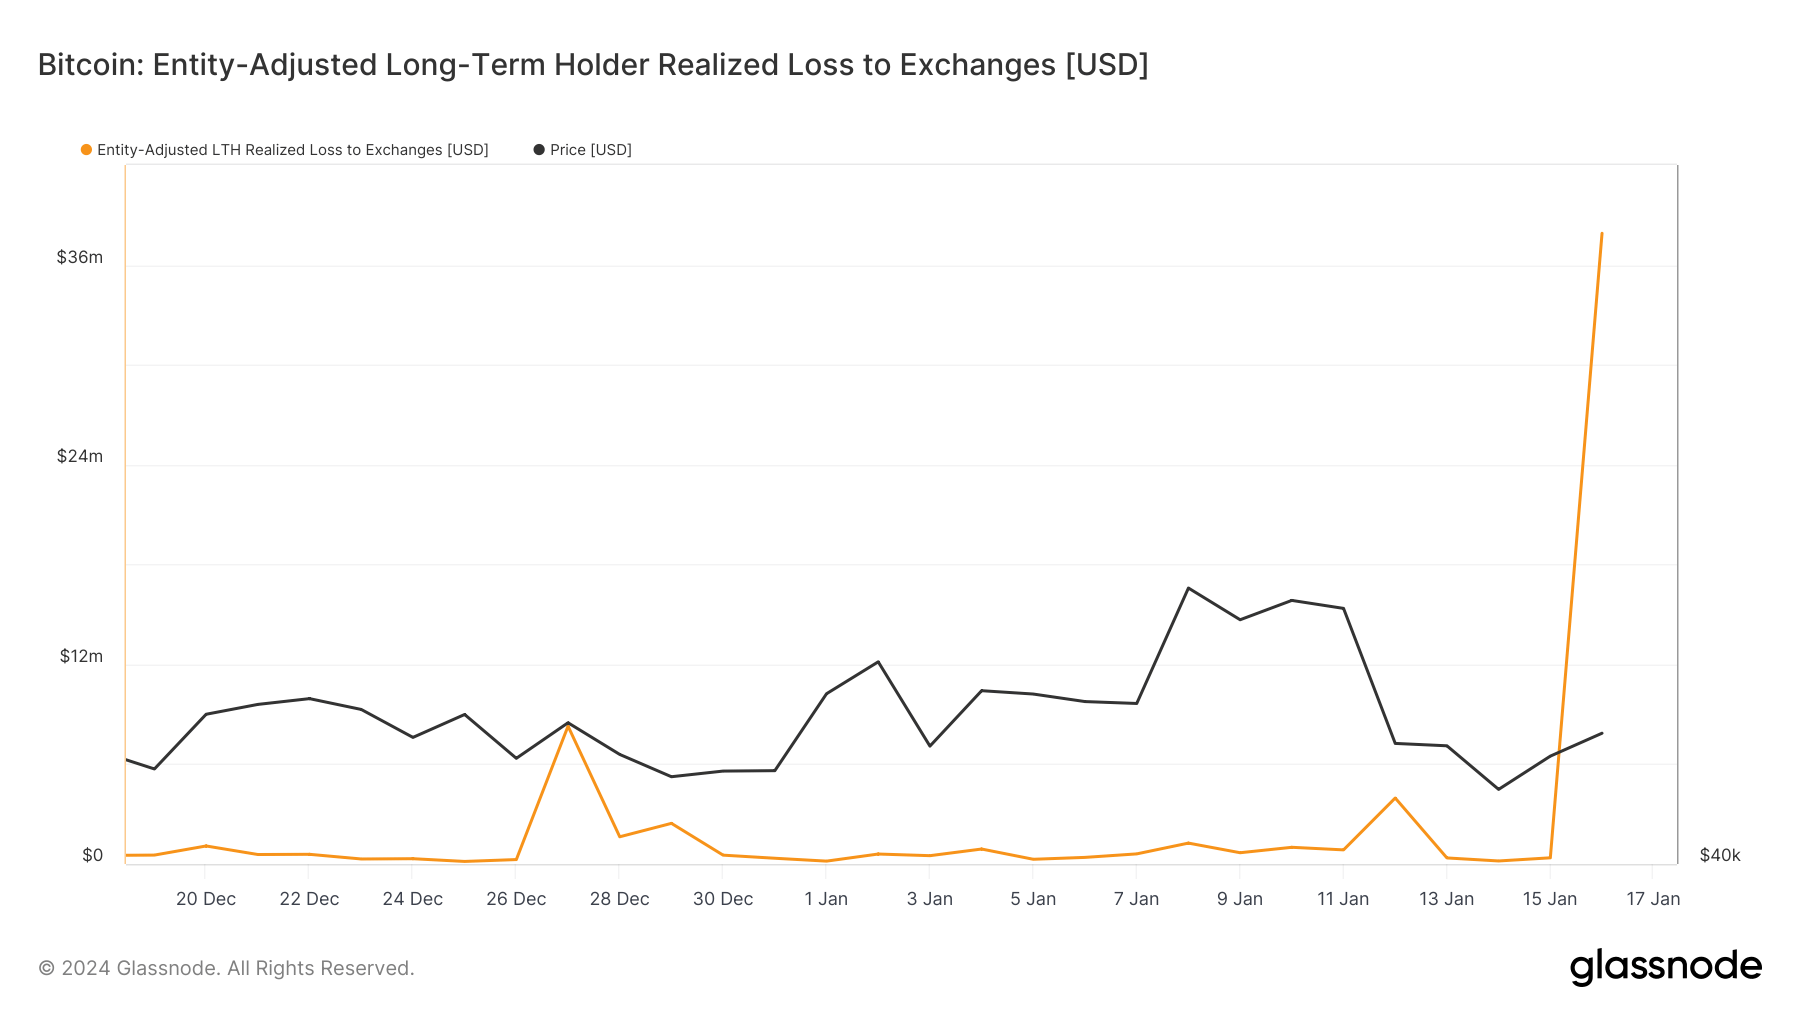 long-term holder realized loss to exchanges 